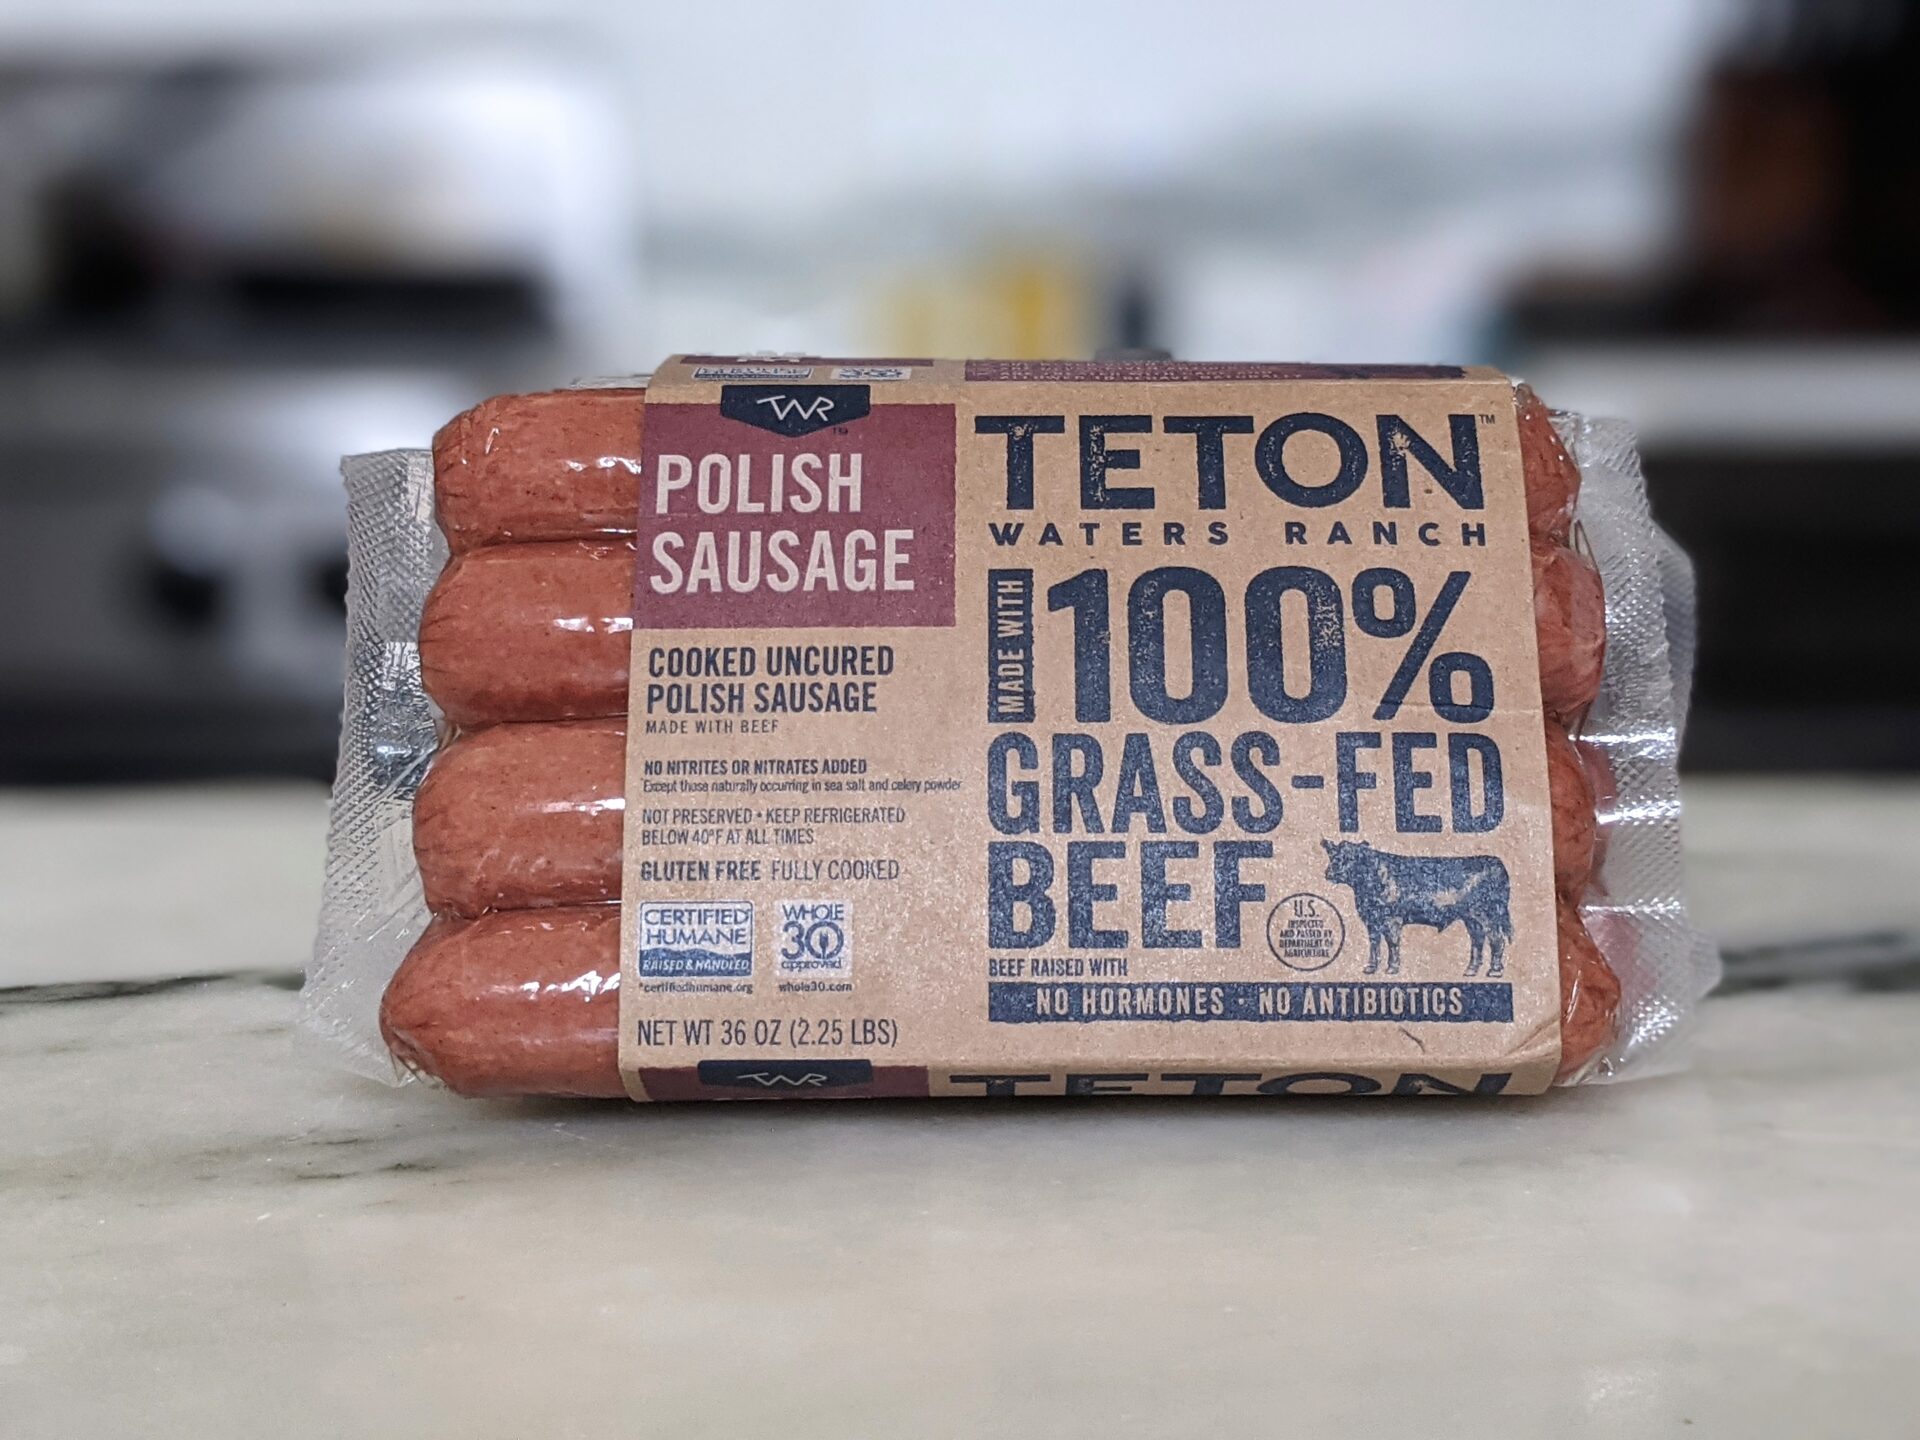 Costco Polish Sausages Teton Waters Ranch Review Costco Food Database